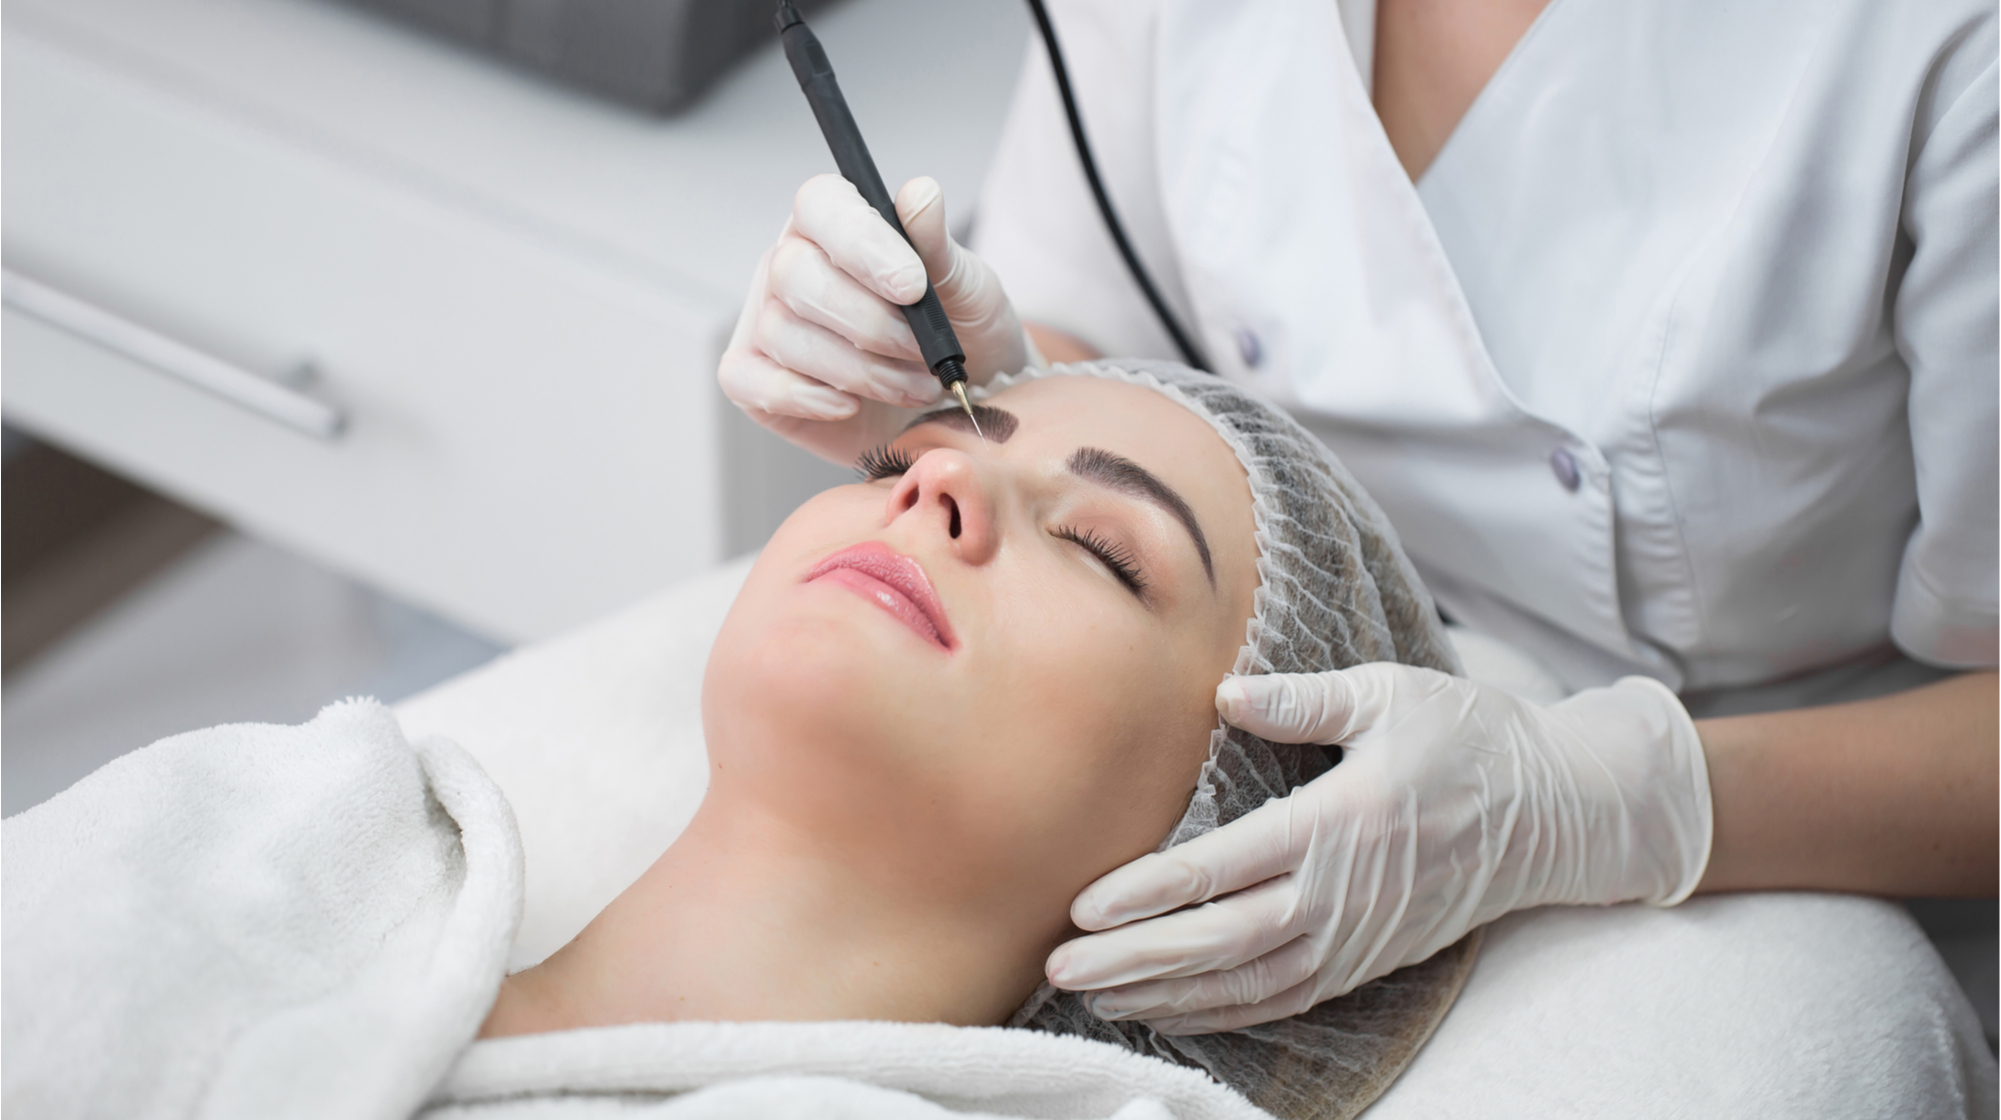 How to choose a dermatologist – advice from a doctor